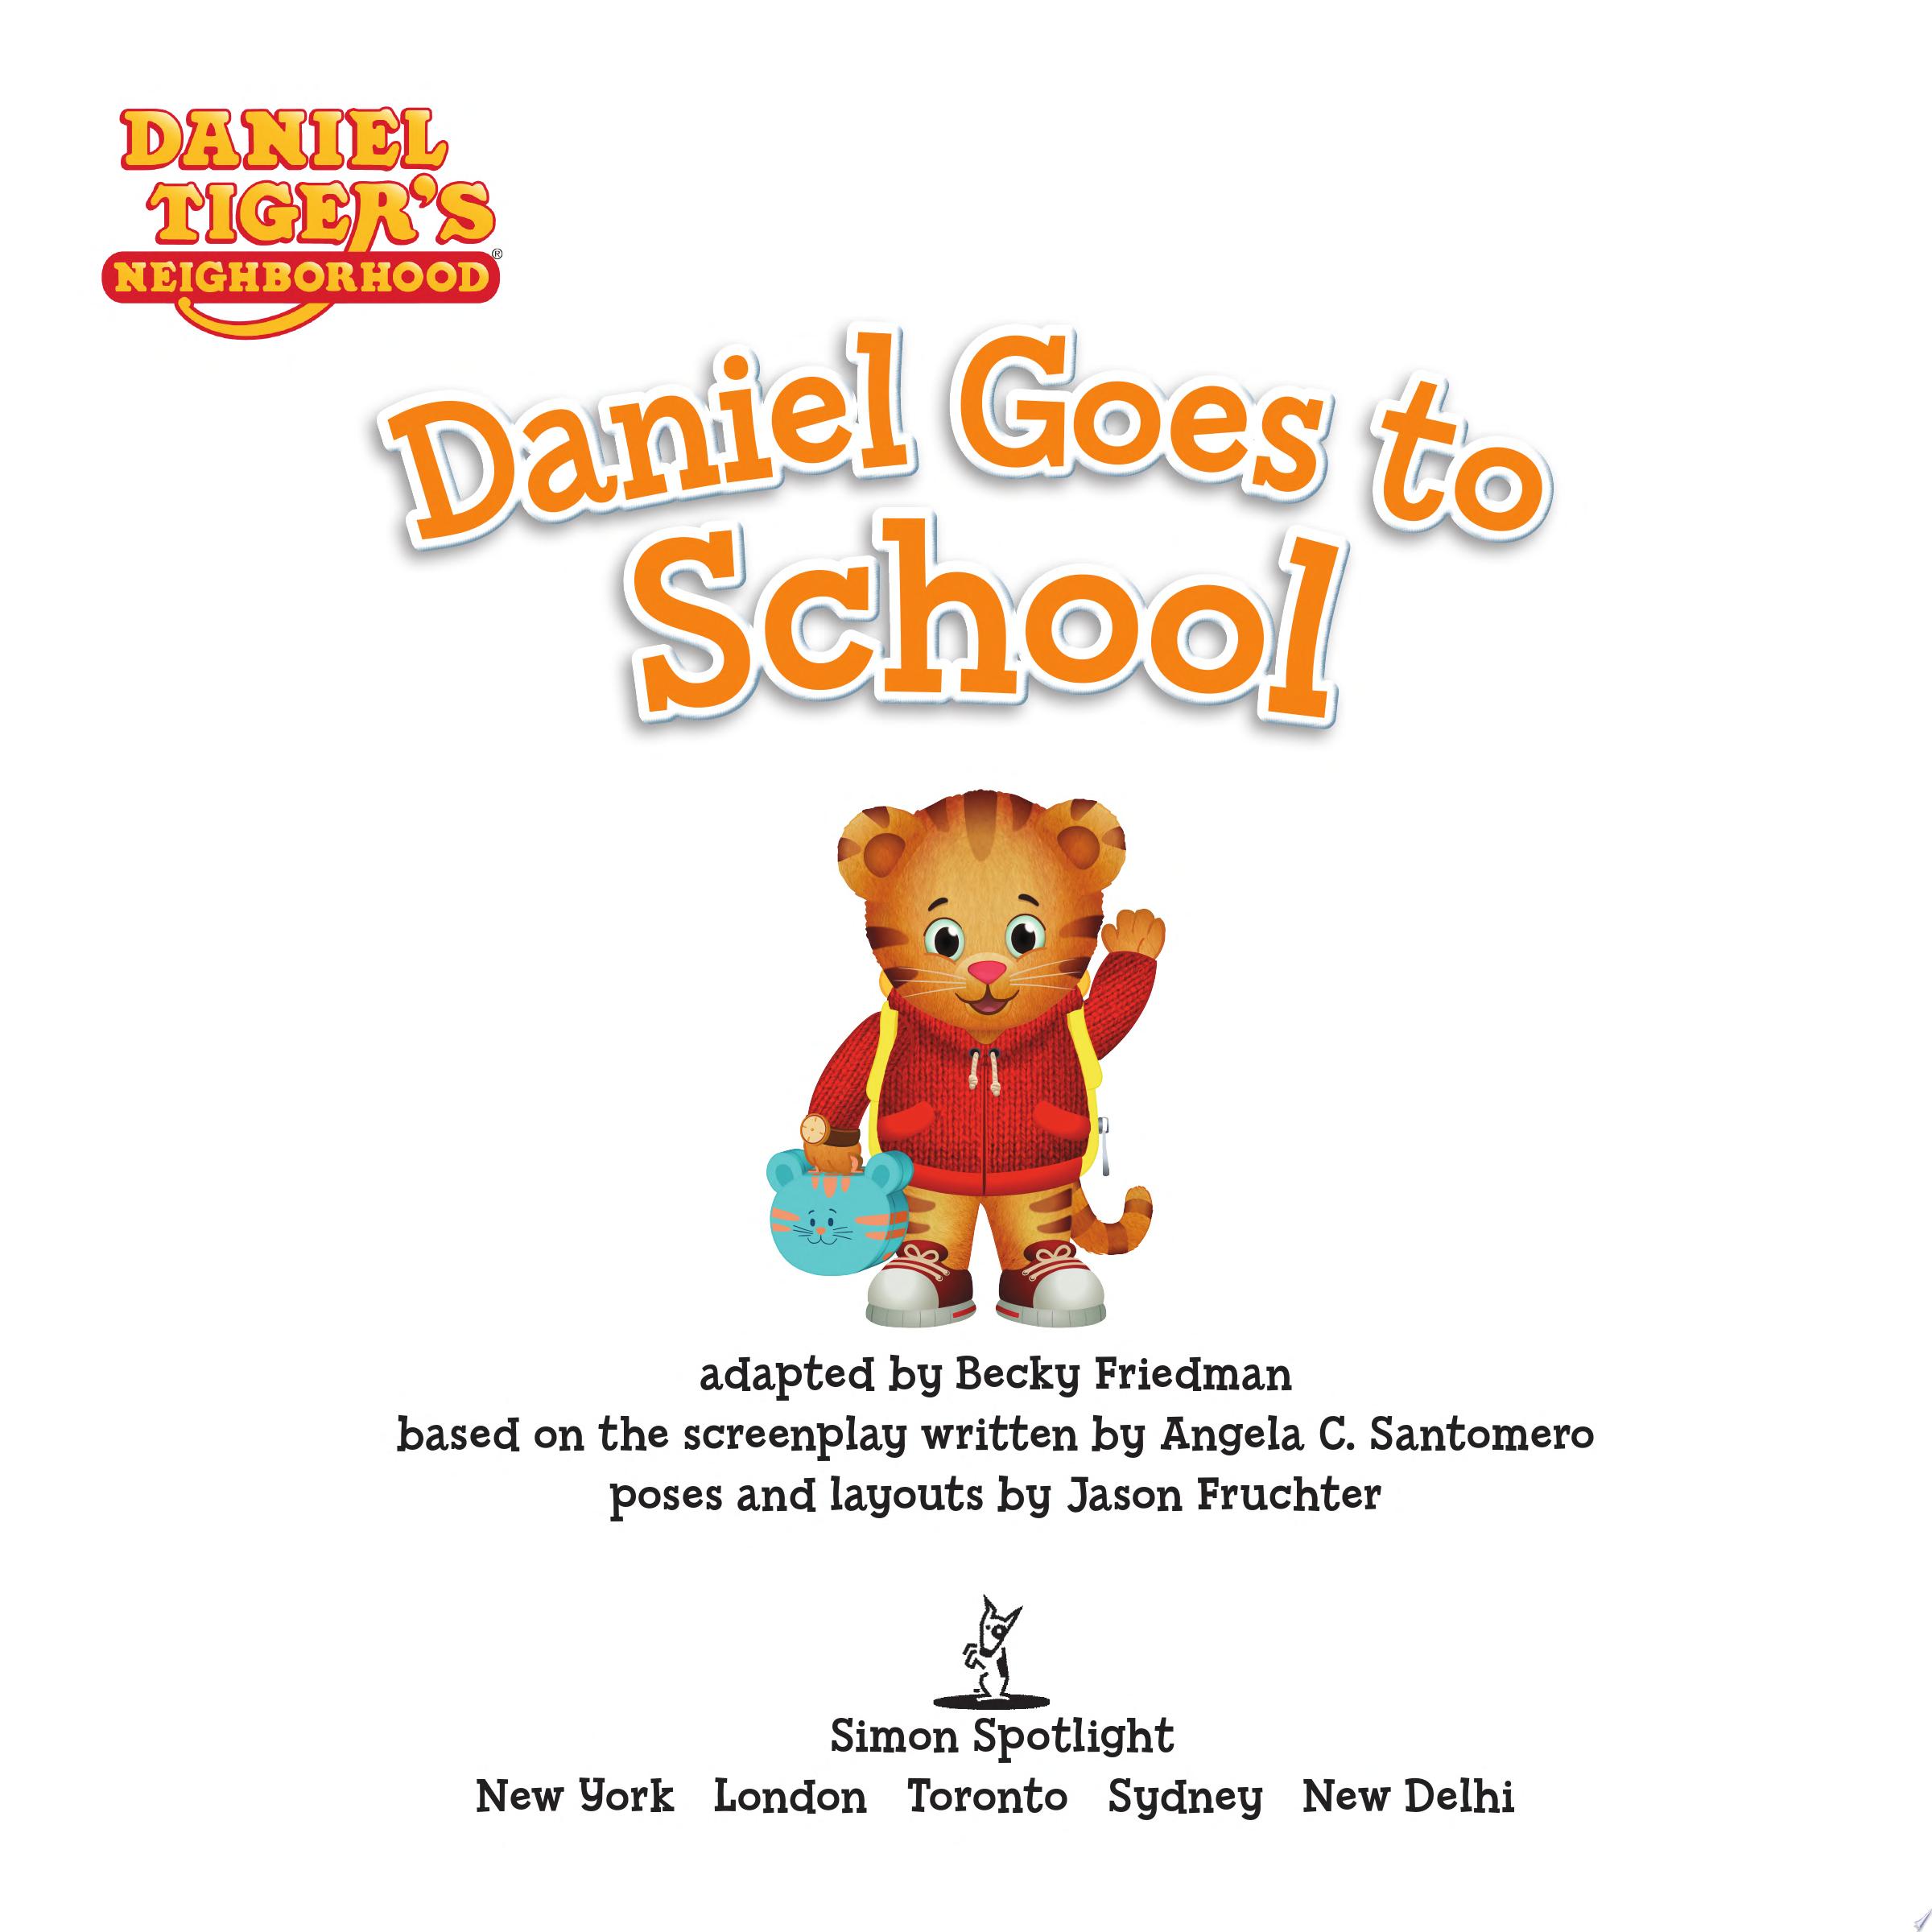 Image for "Daniel Goes to School"